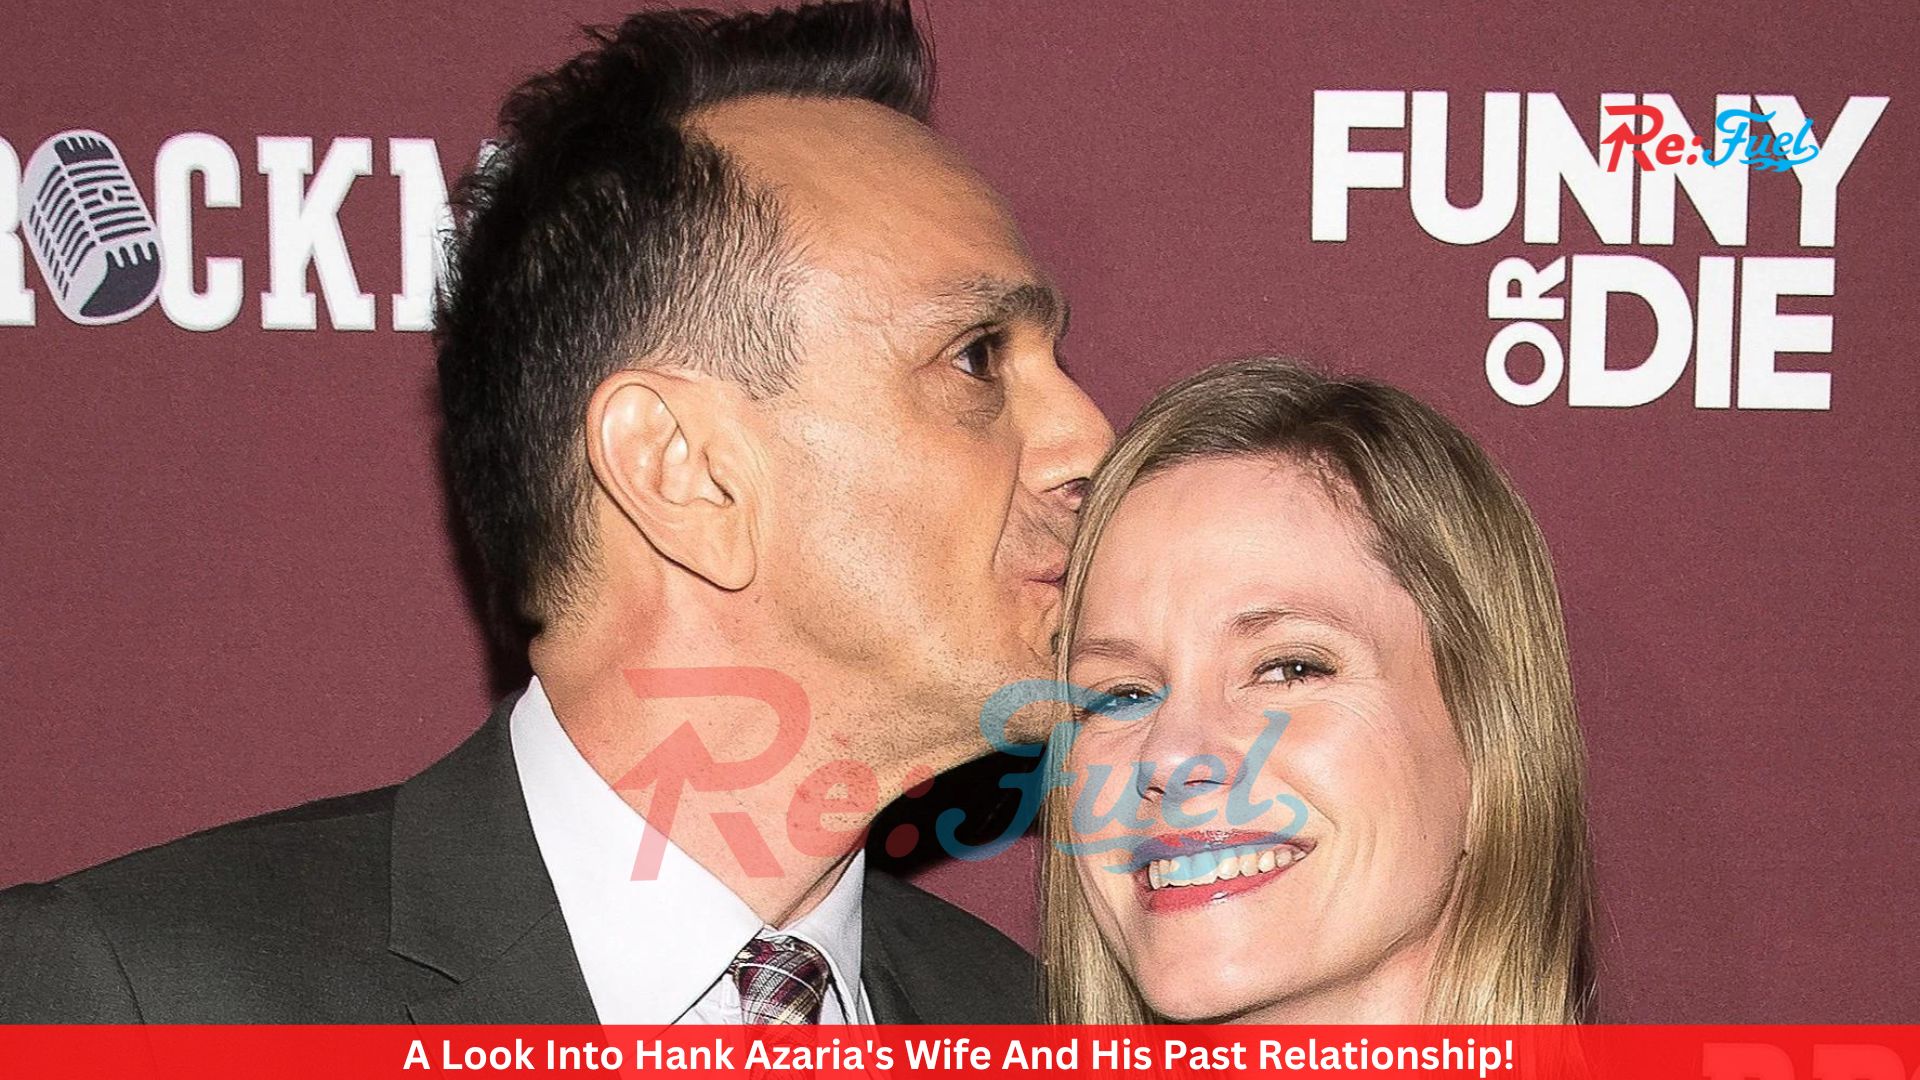 A Look Into Hank Azaria's Wife And His Past Relationship!